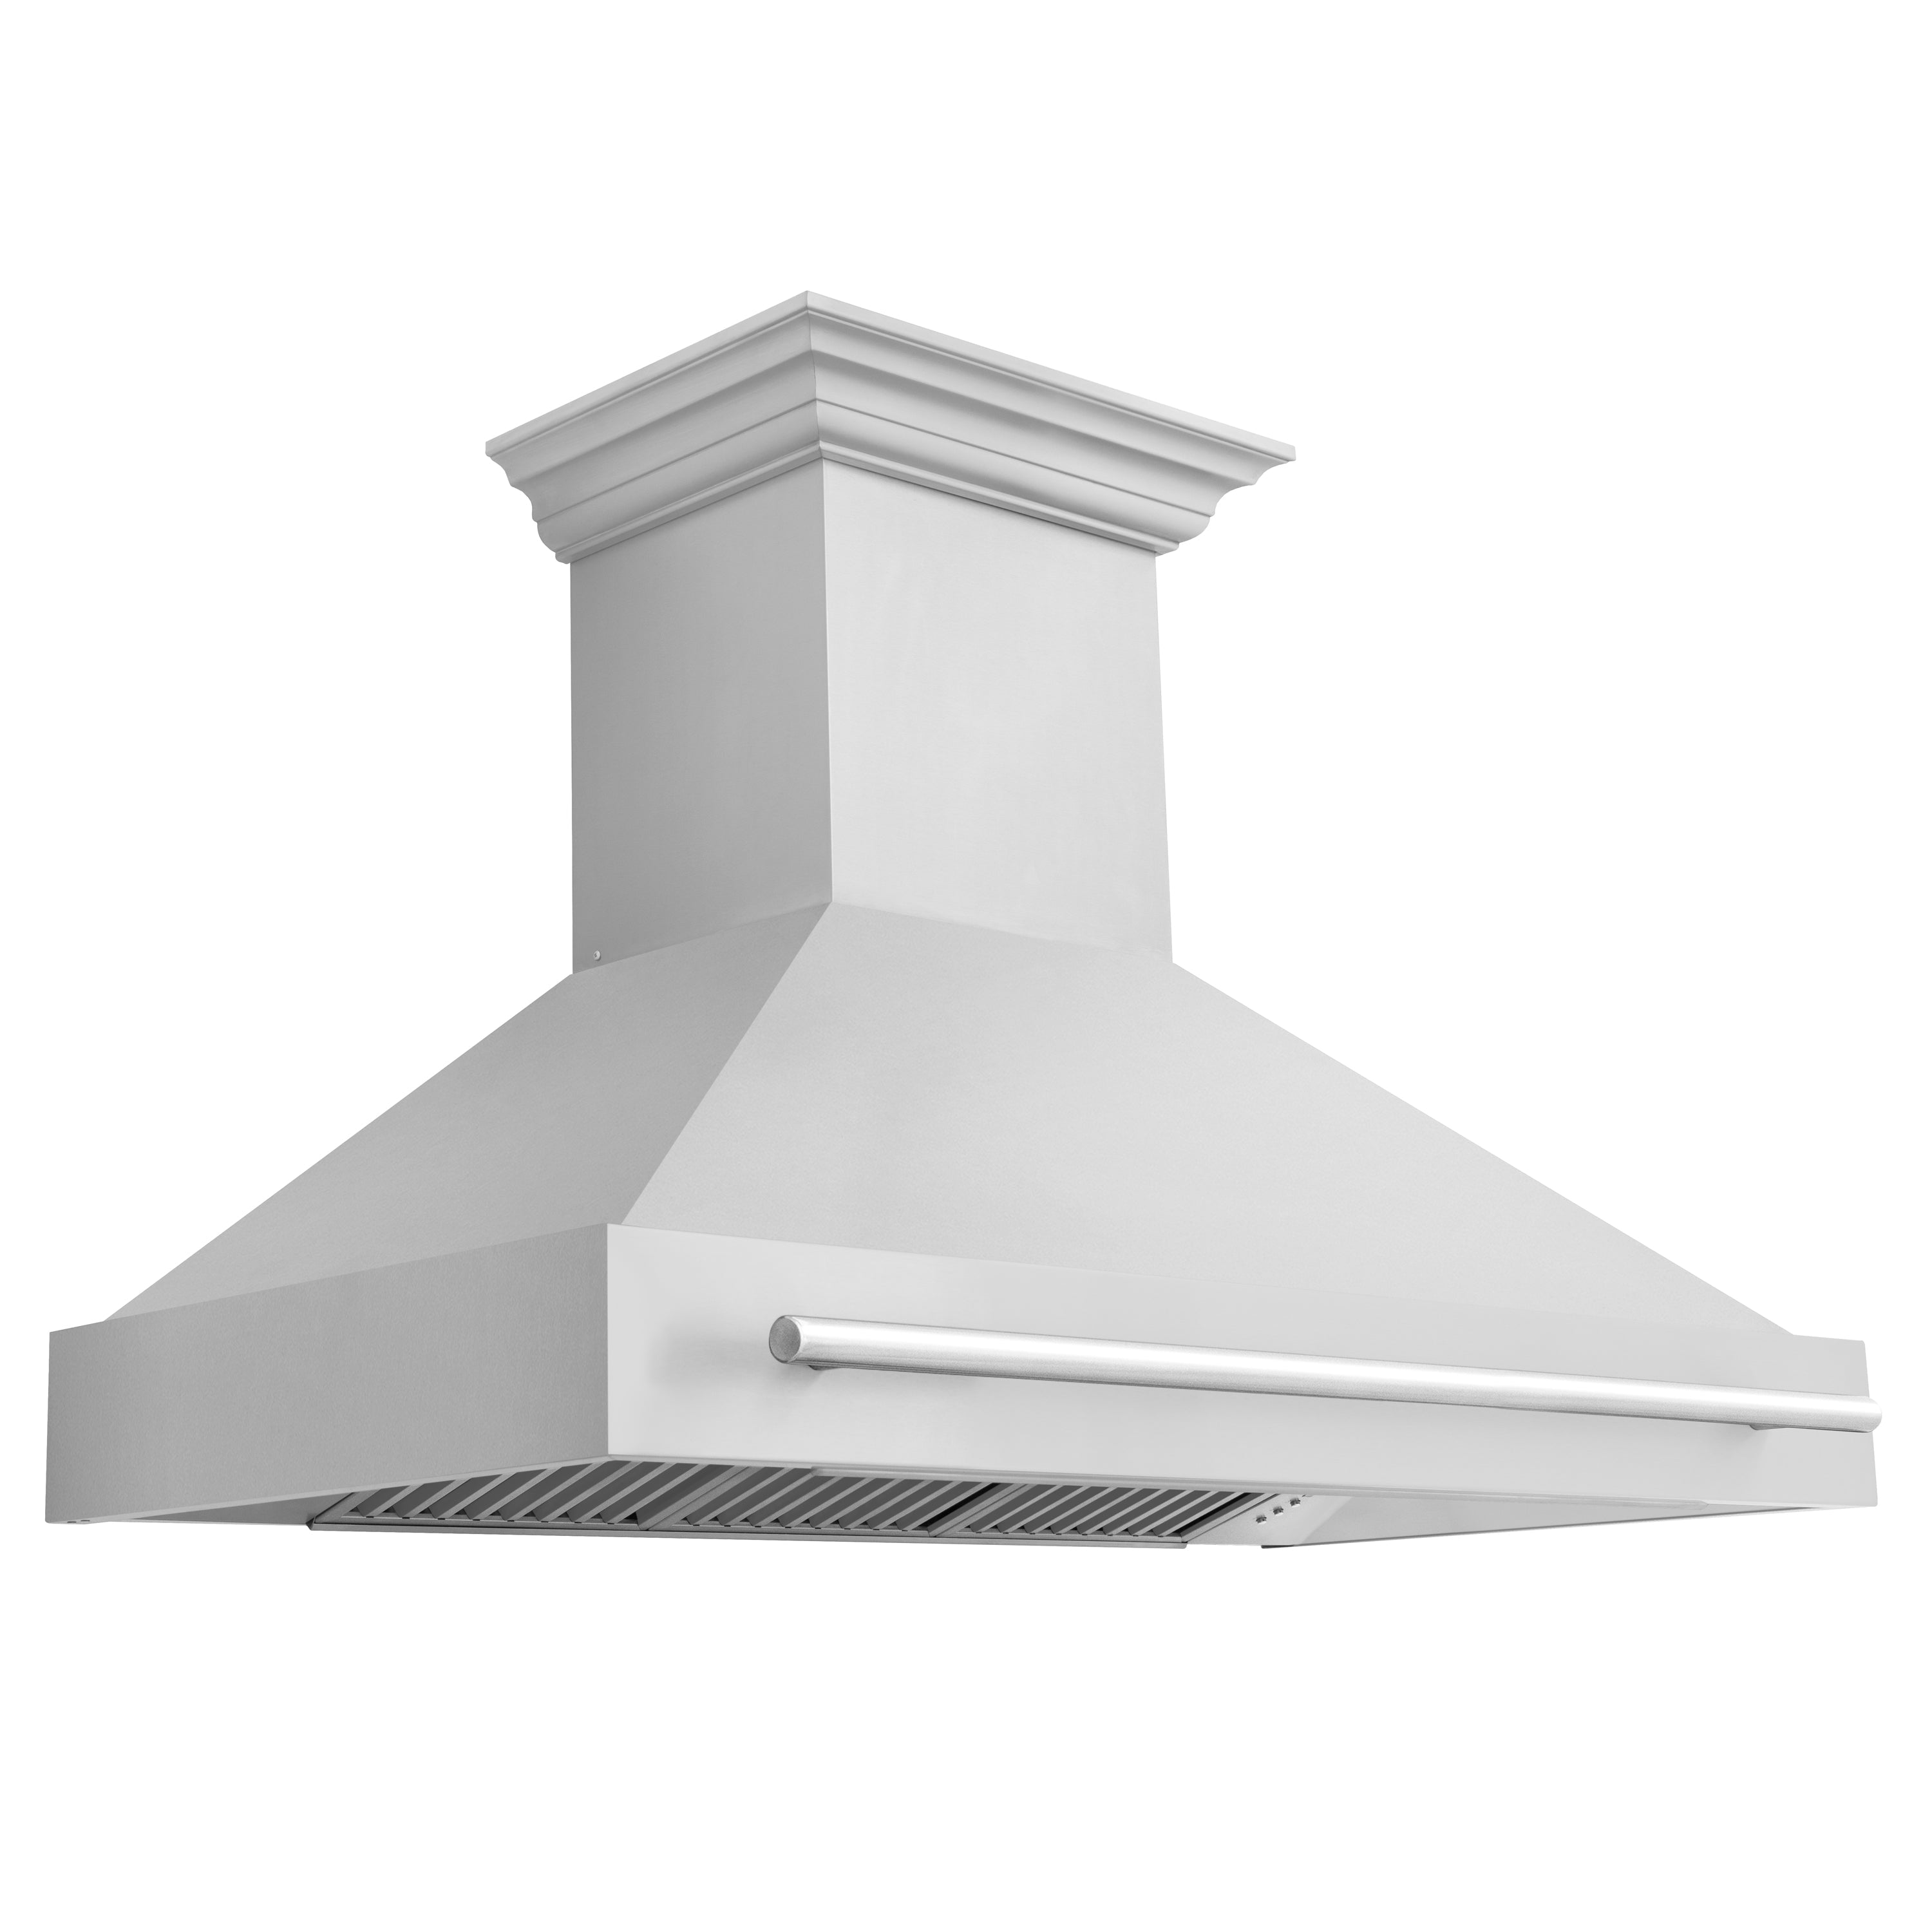 ZLINE 48 in. Stainless Steel Range Hood with Stainless Steel Handle (8654STX-48)